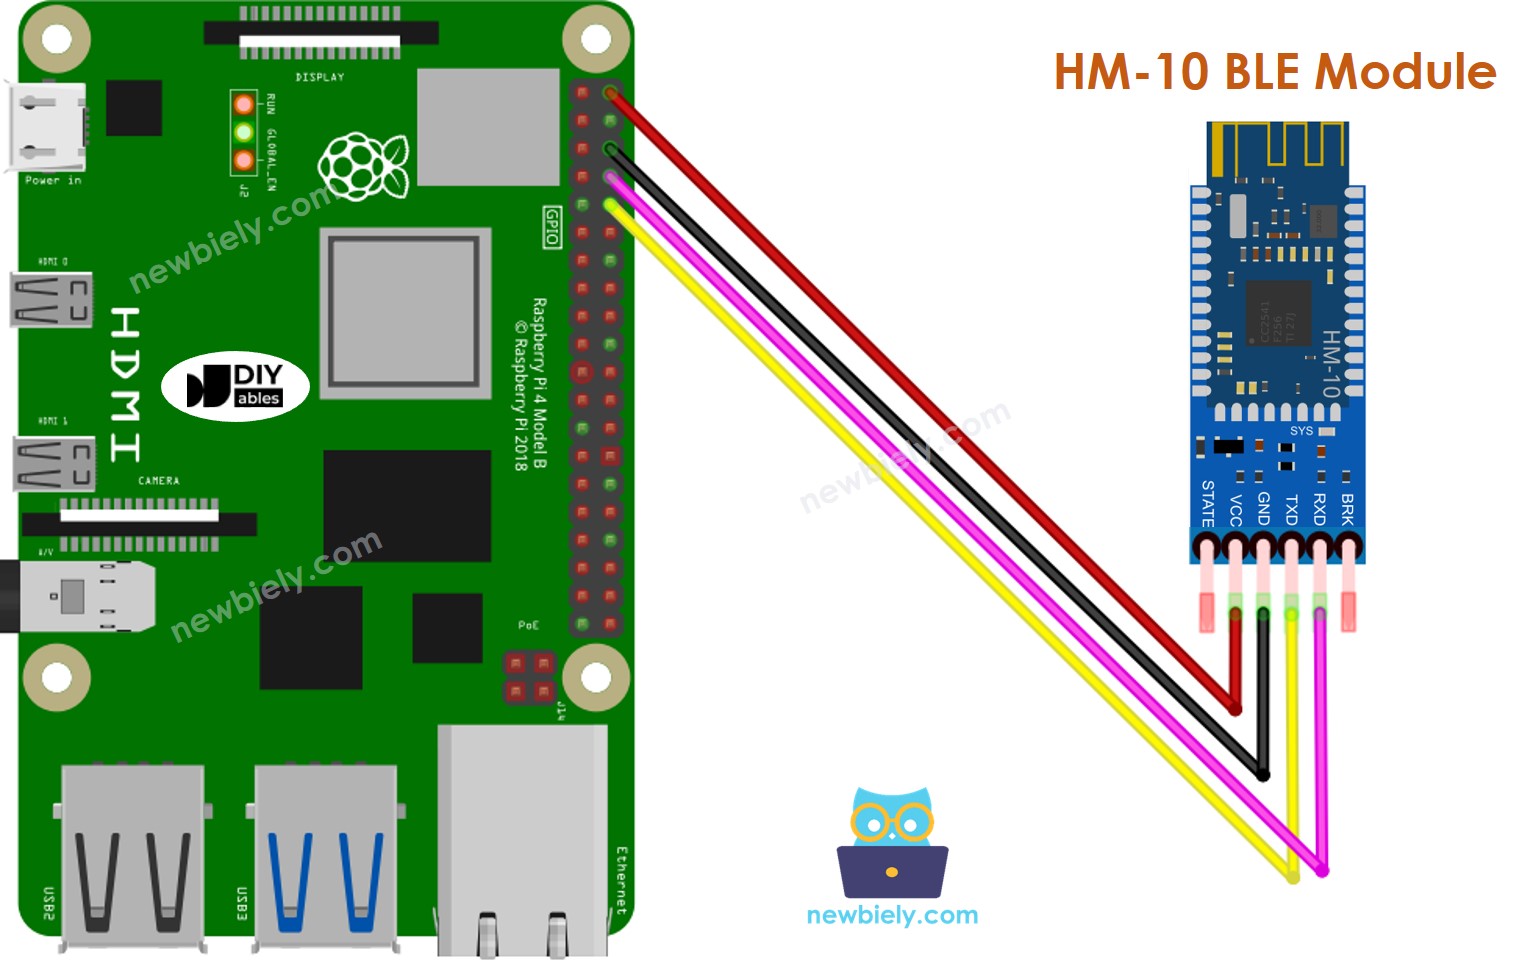 The wiring diagram between Raspberry Pi and BLE